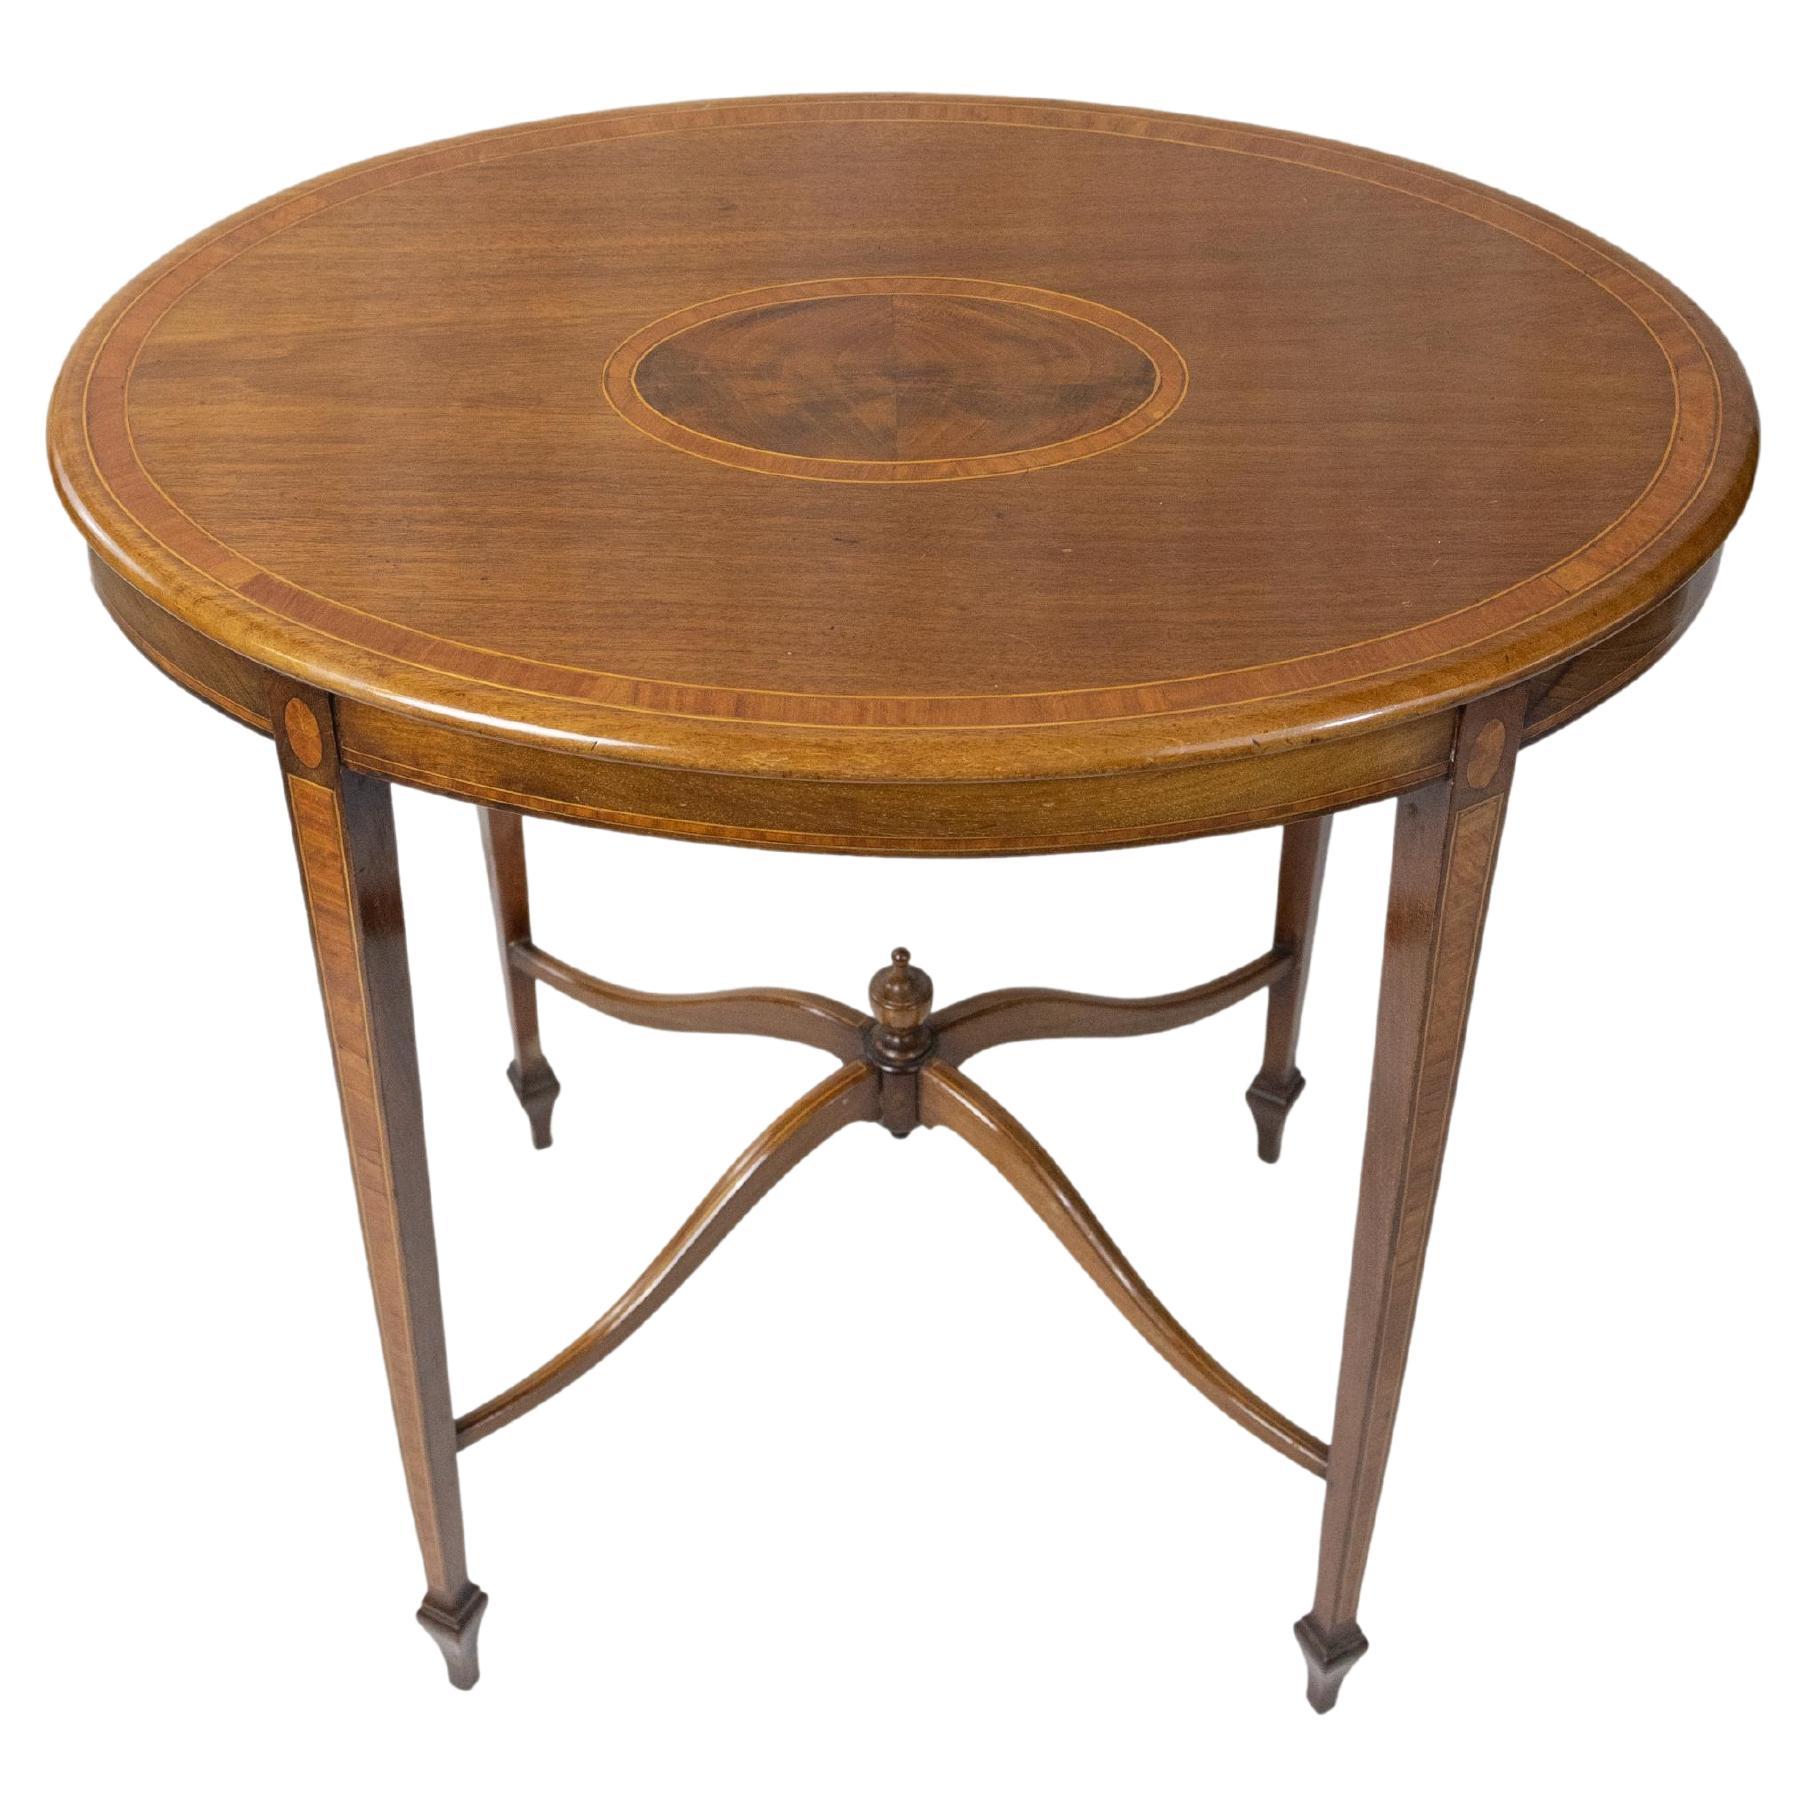 Figured Mahogany and Satinwood-Inlaid Oval Occasional Table, English, ca. 1890 For Sale